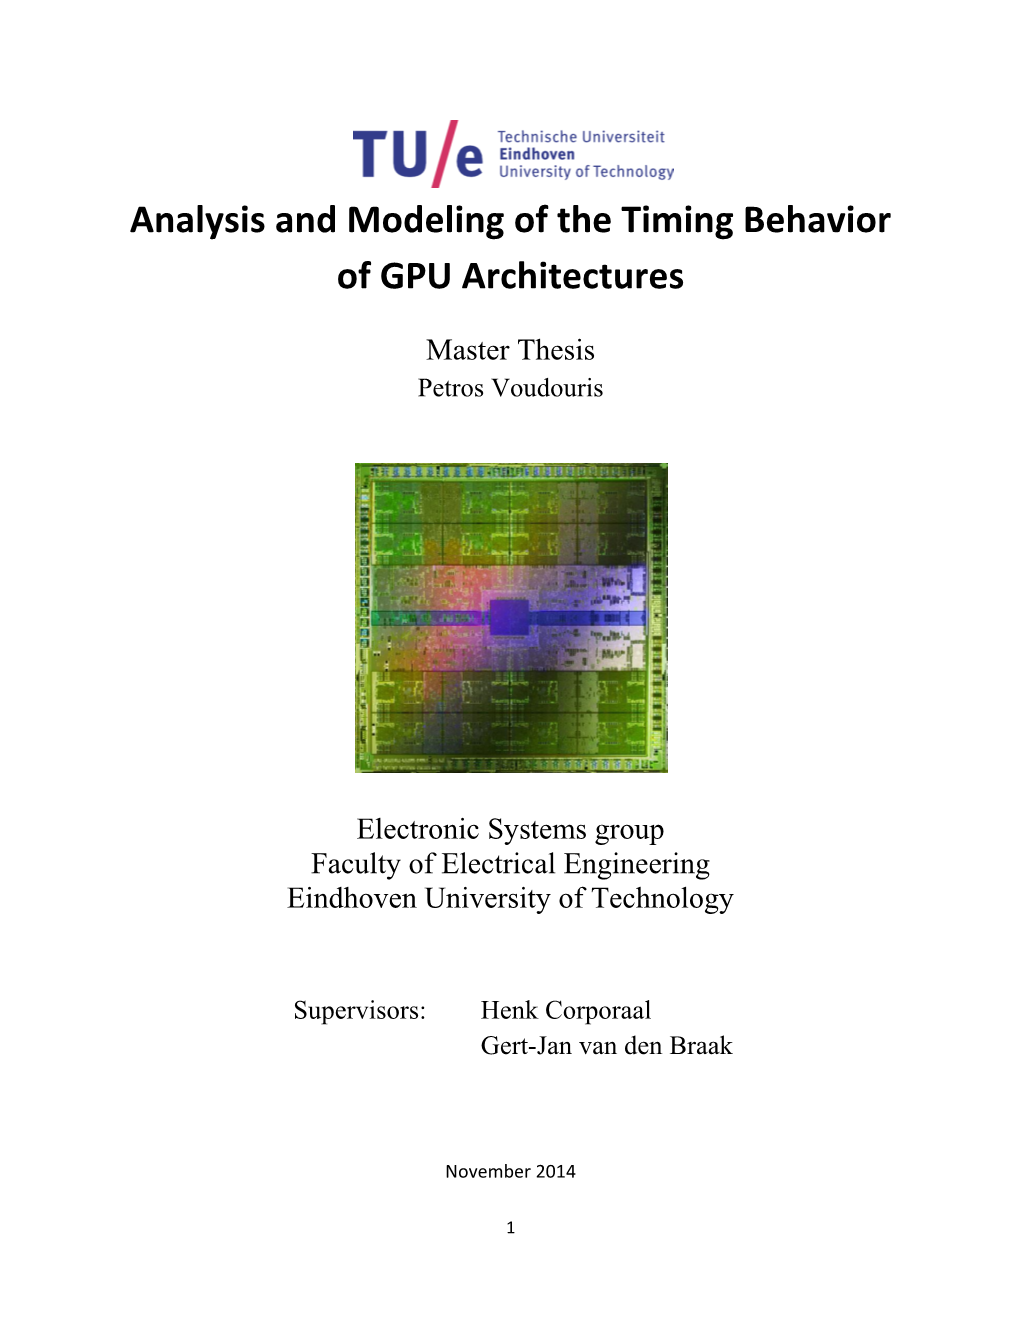 Analysis and Modeling of the Timing Behavior of GPU Architectures